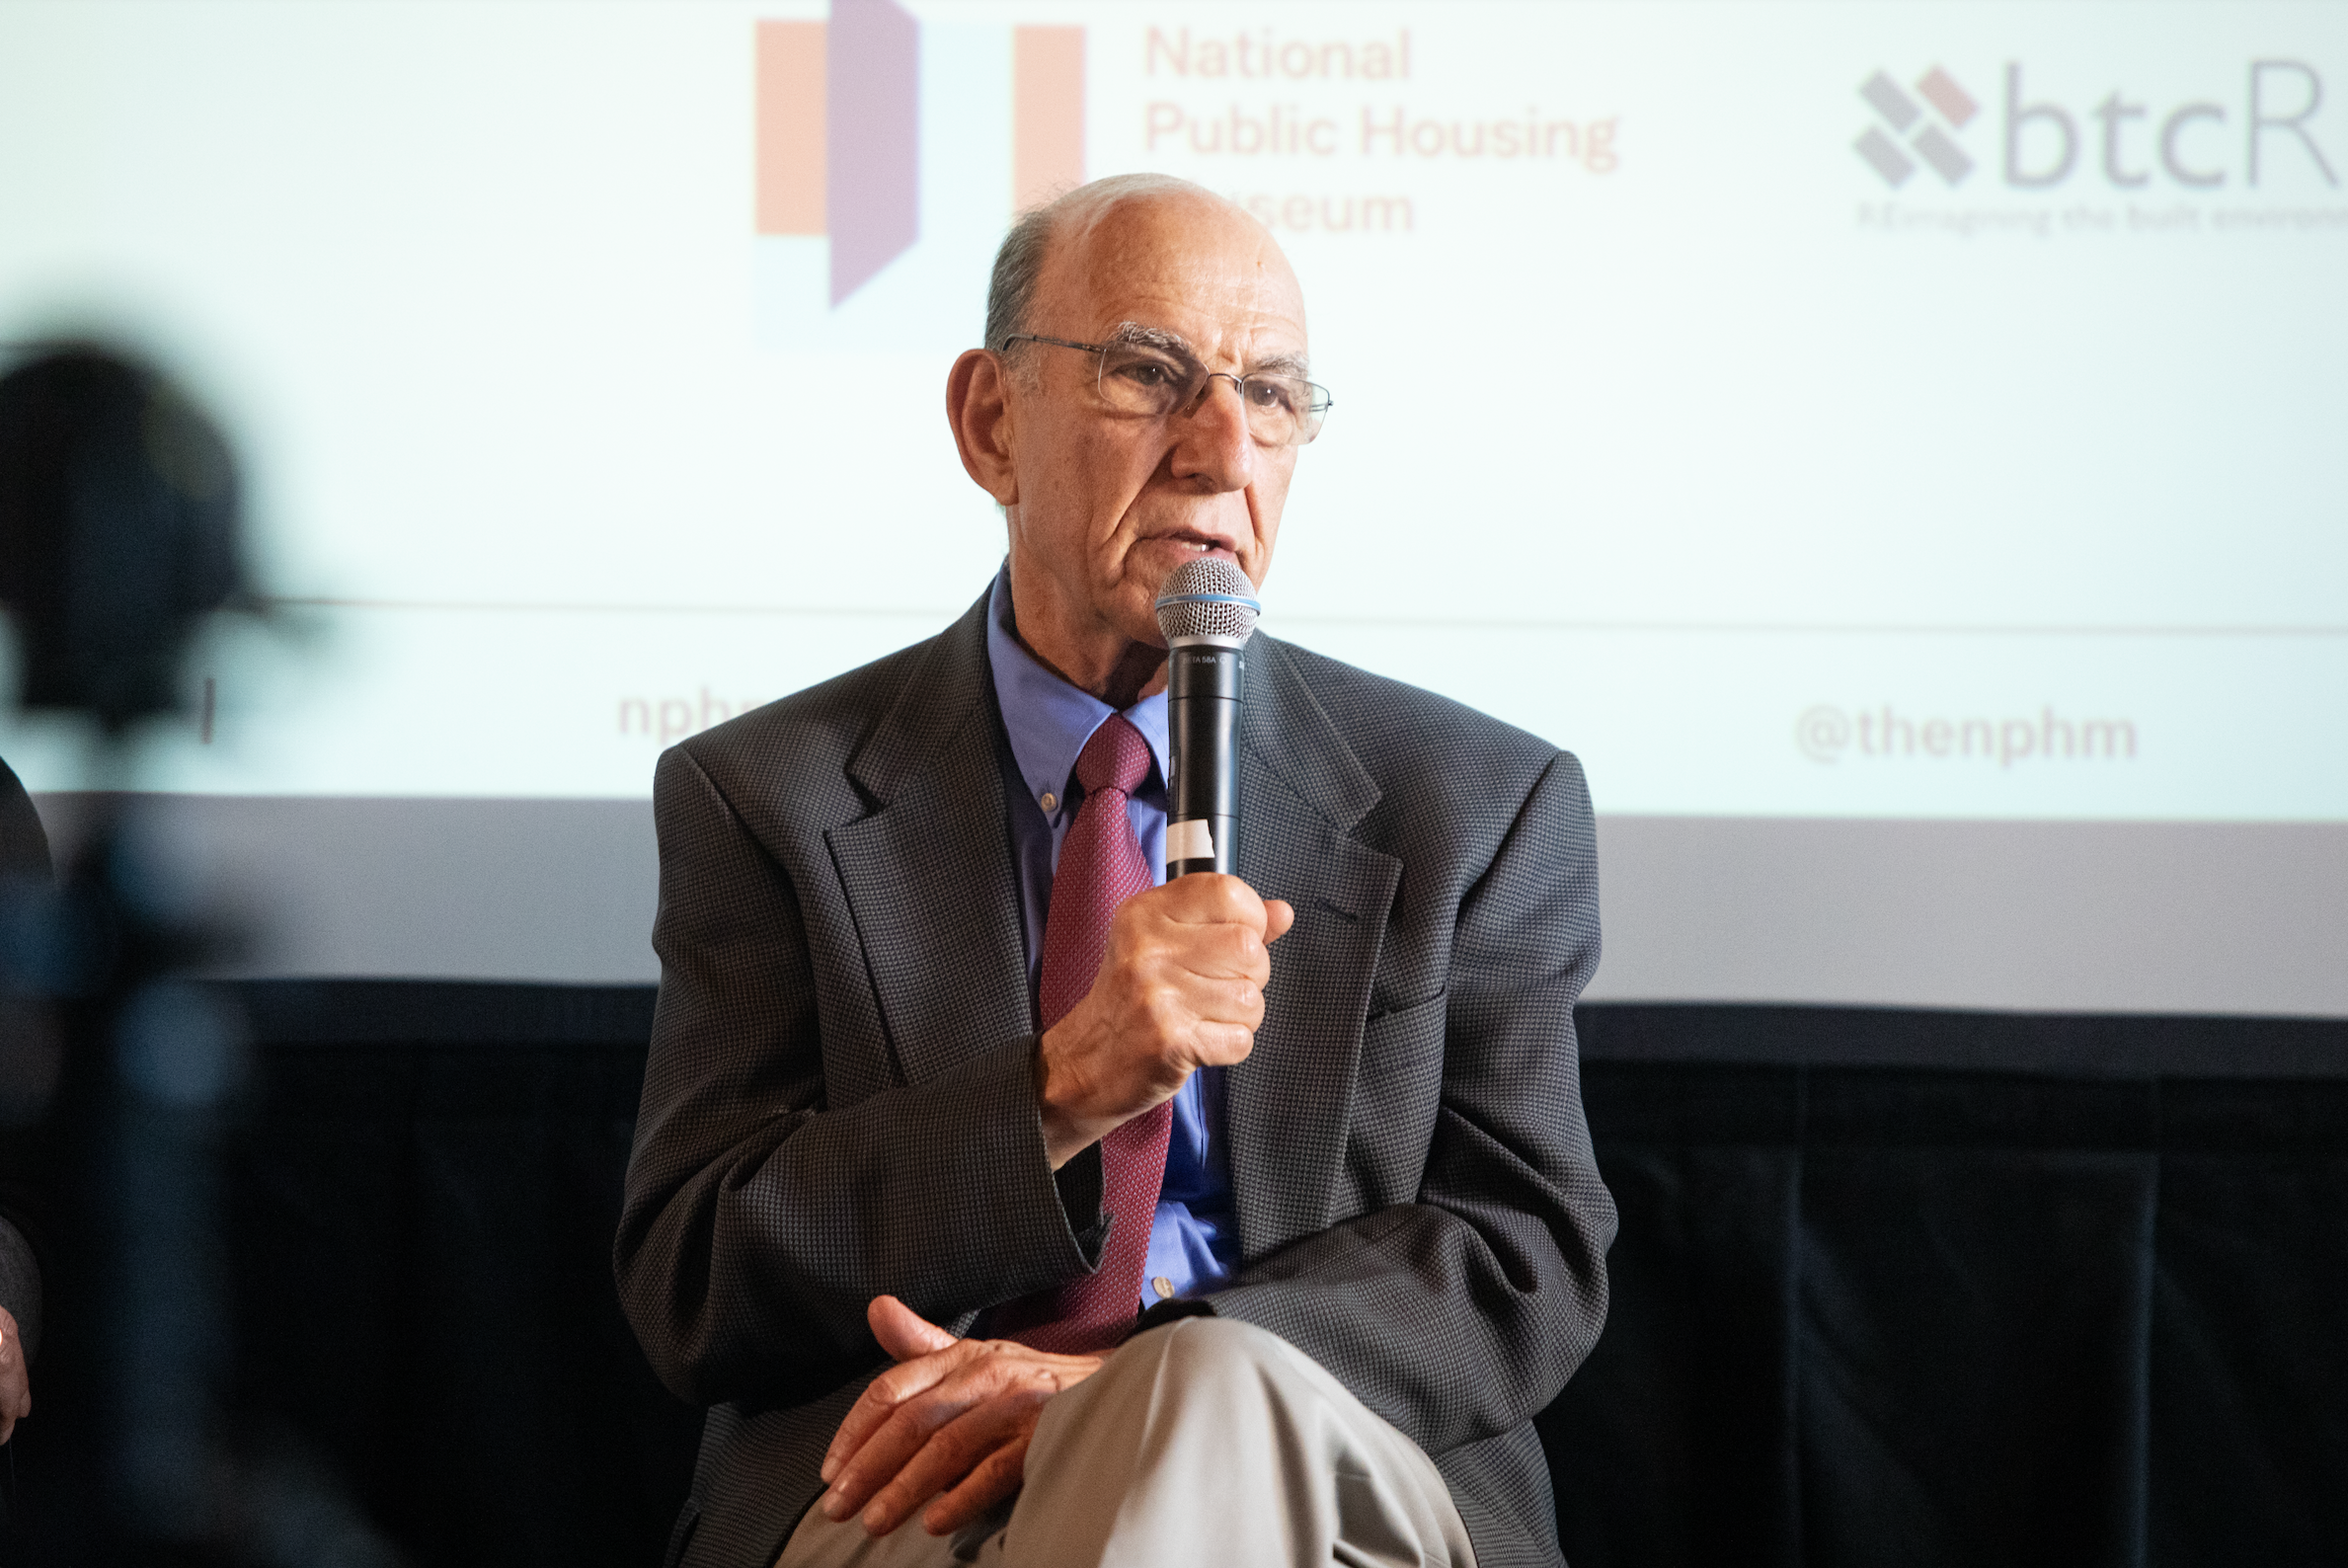  Richard Rothstein speaks into a microphone while seated.  